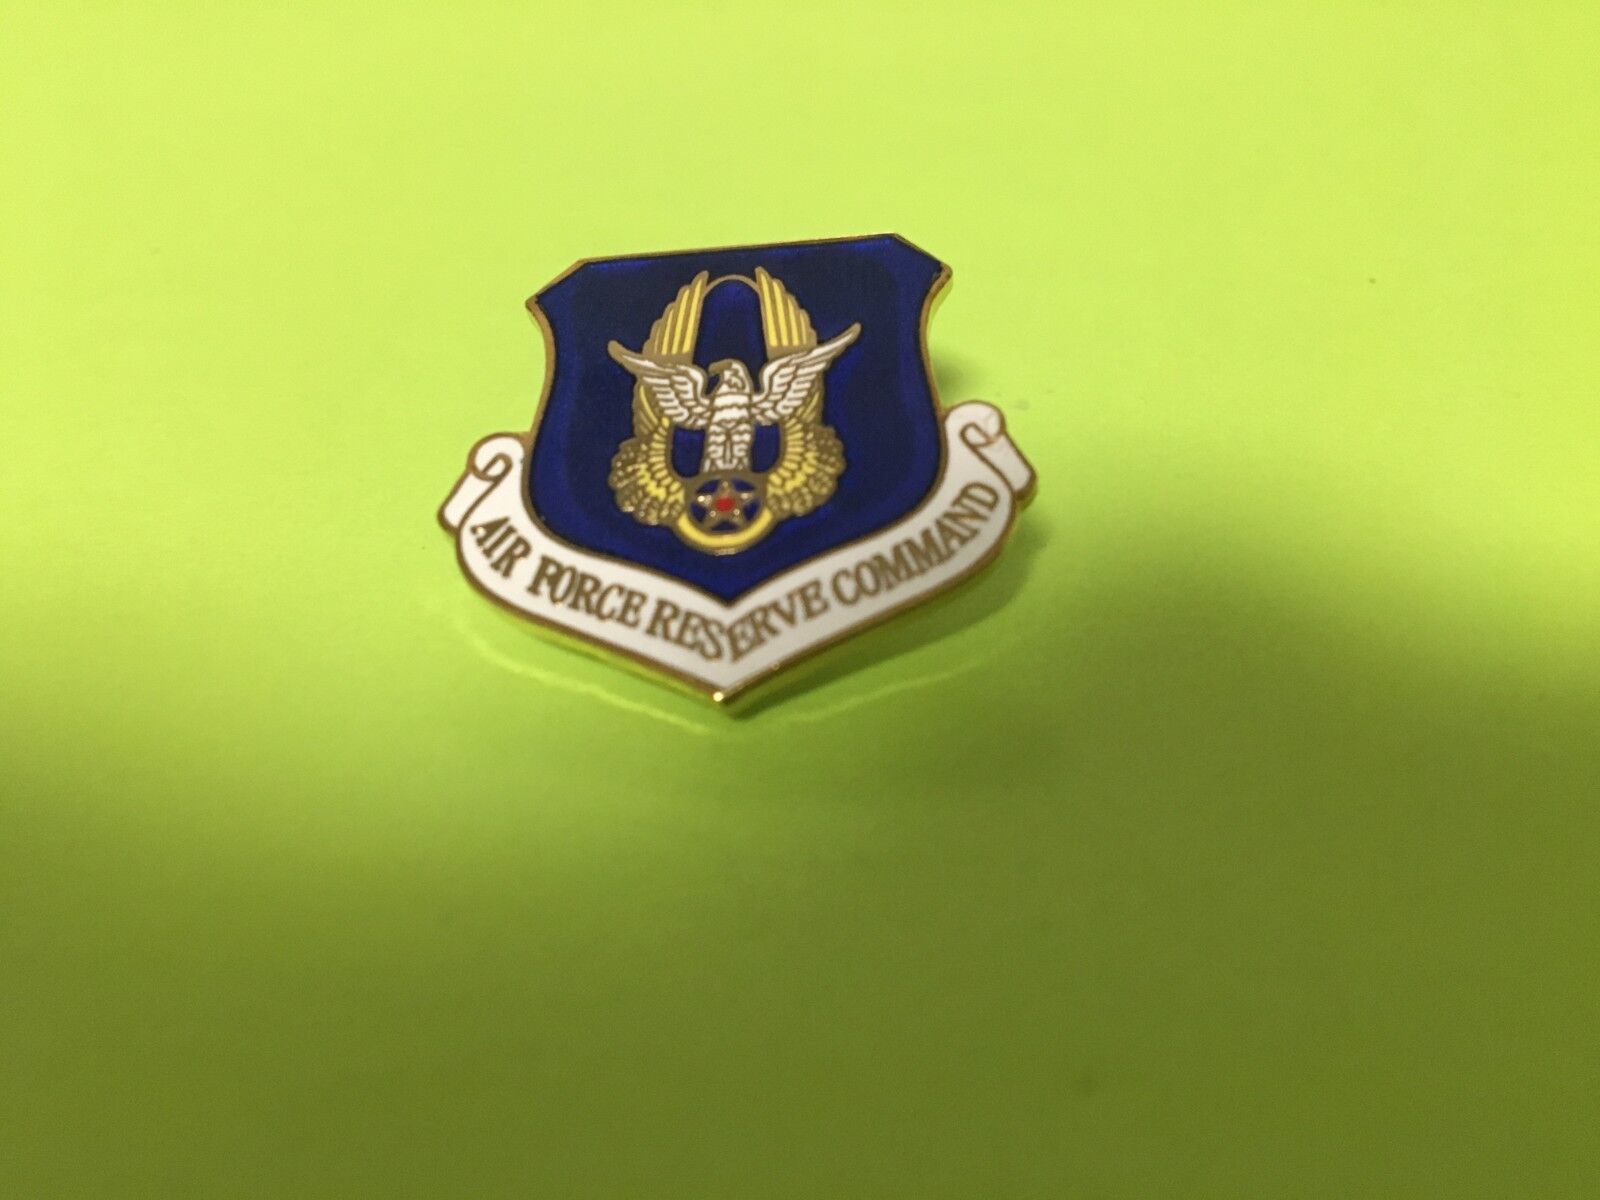 US AIR FORCE RESERVE COMMAND HAT/LAPEL PIN